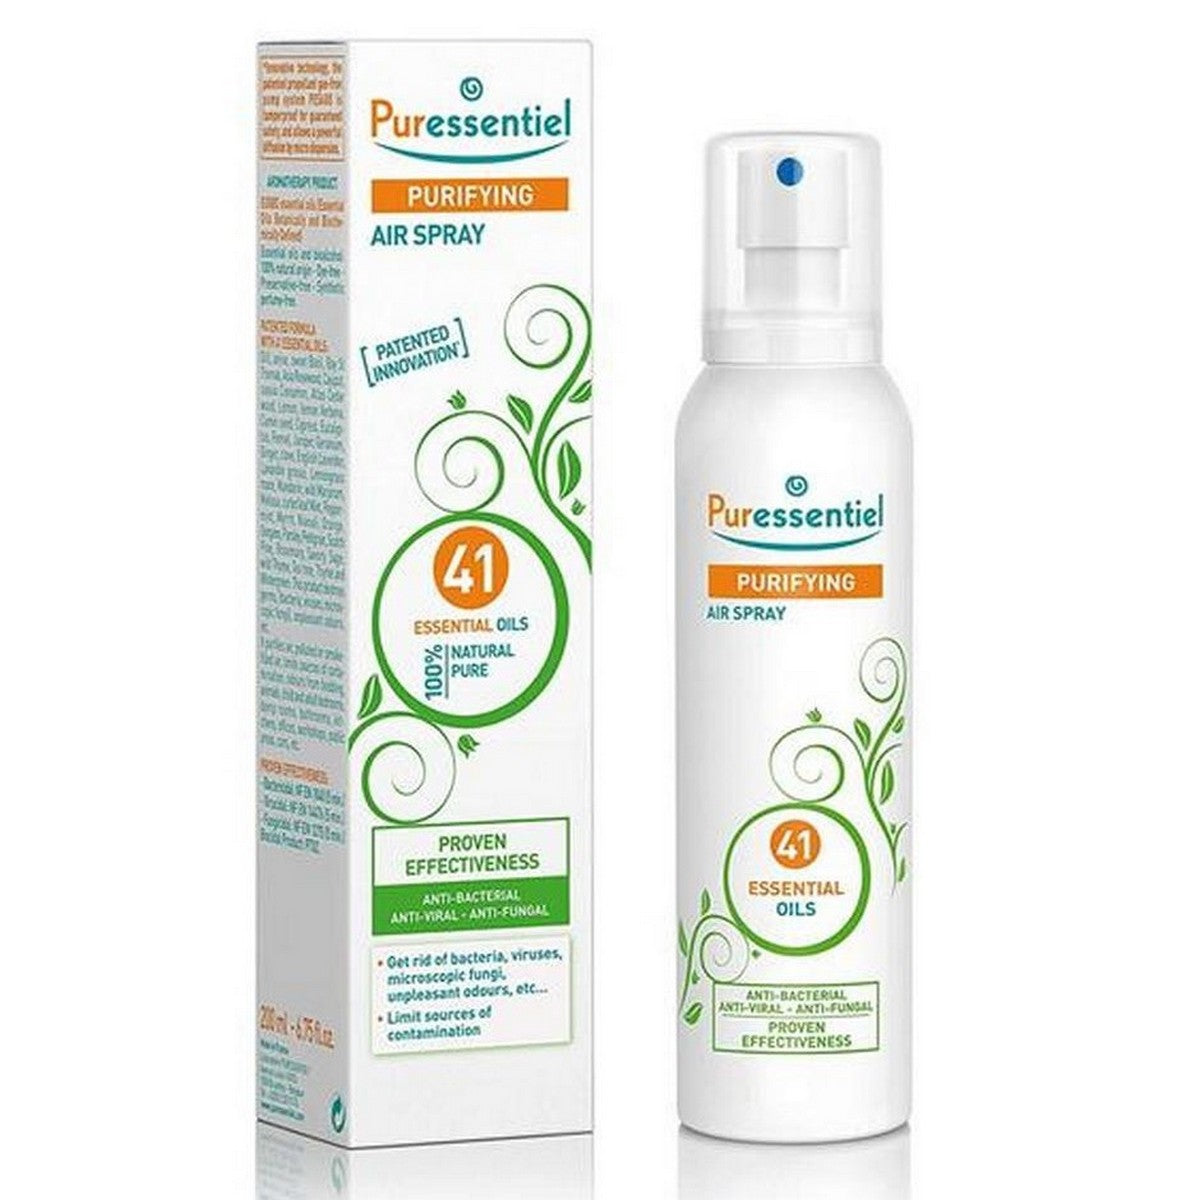 Puressentiel Purifying Air Spray With 41 Essential Oils 200ml